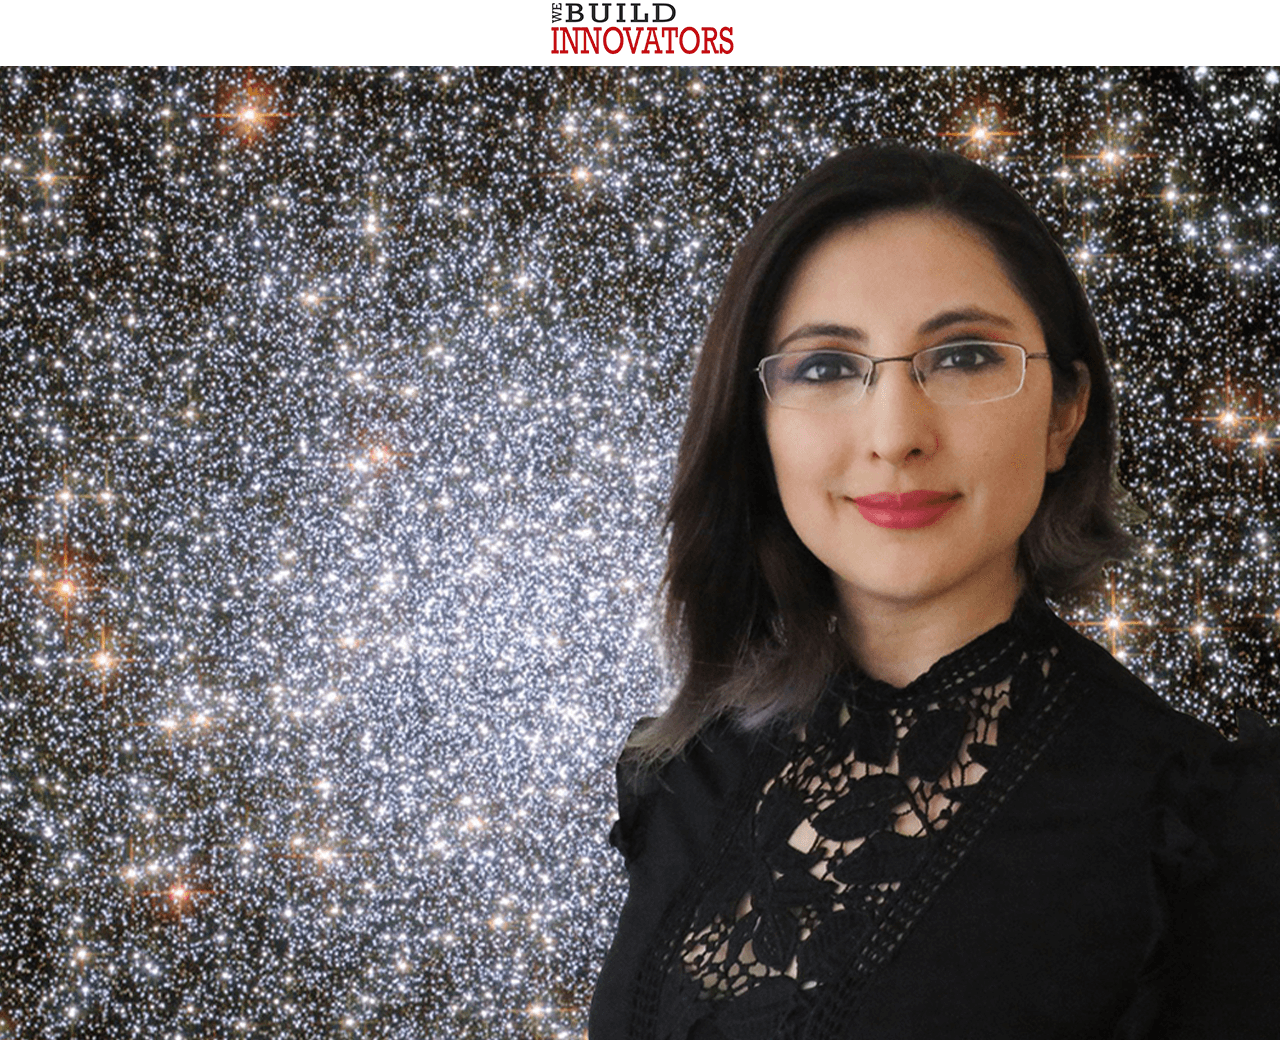 TTU astrophysicist and post-doc Liliana Rivera Sandoval with image from Hubble Space Telescope